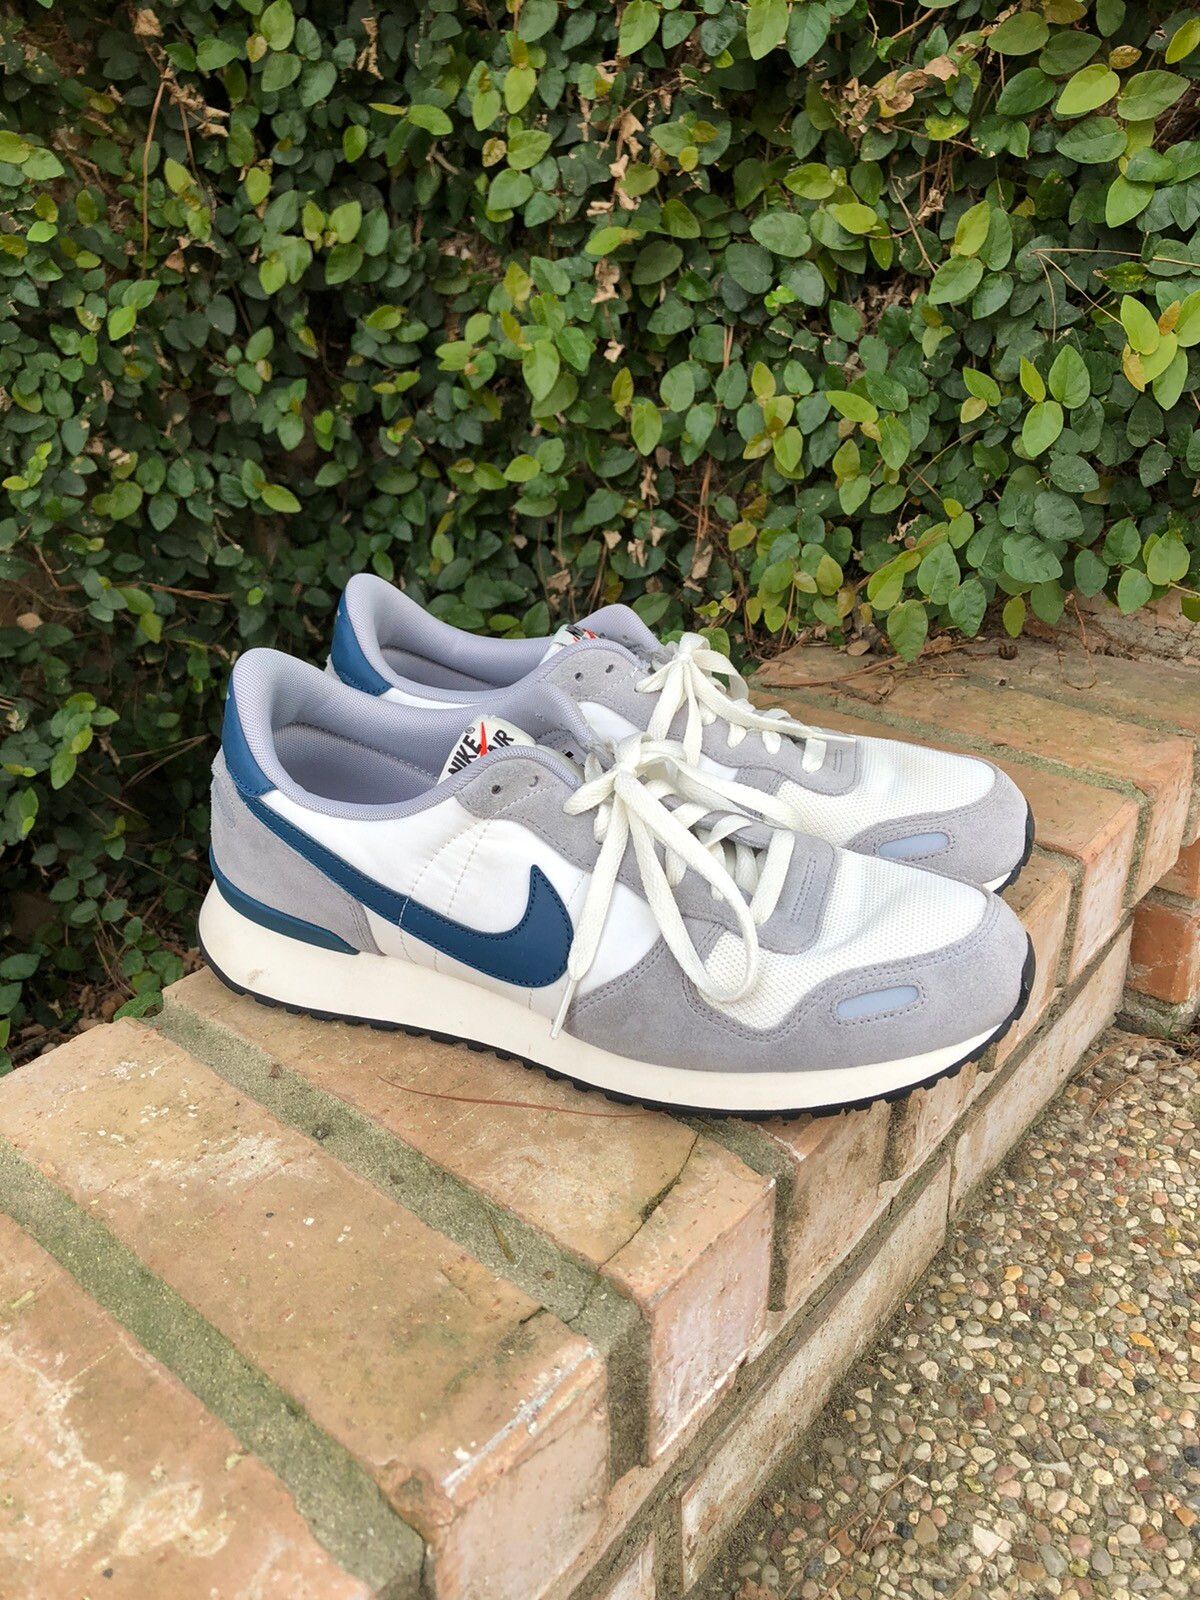 Nike Nike Vintage retro running shoes Size US 12 / EU 45 - 1 Preview